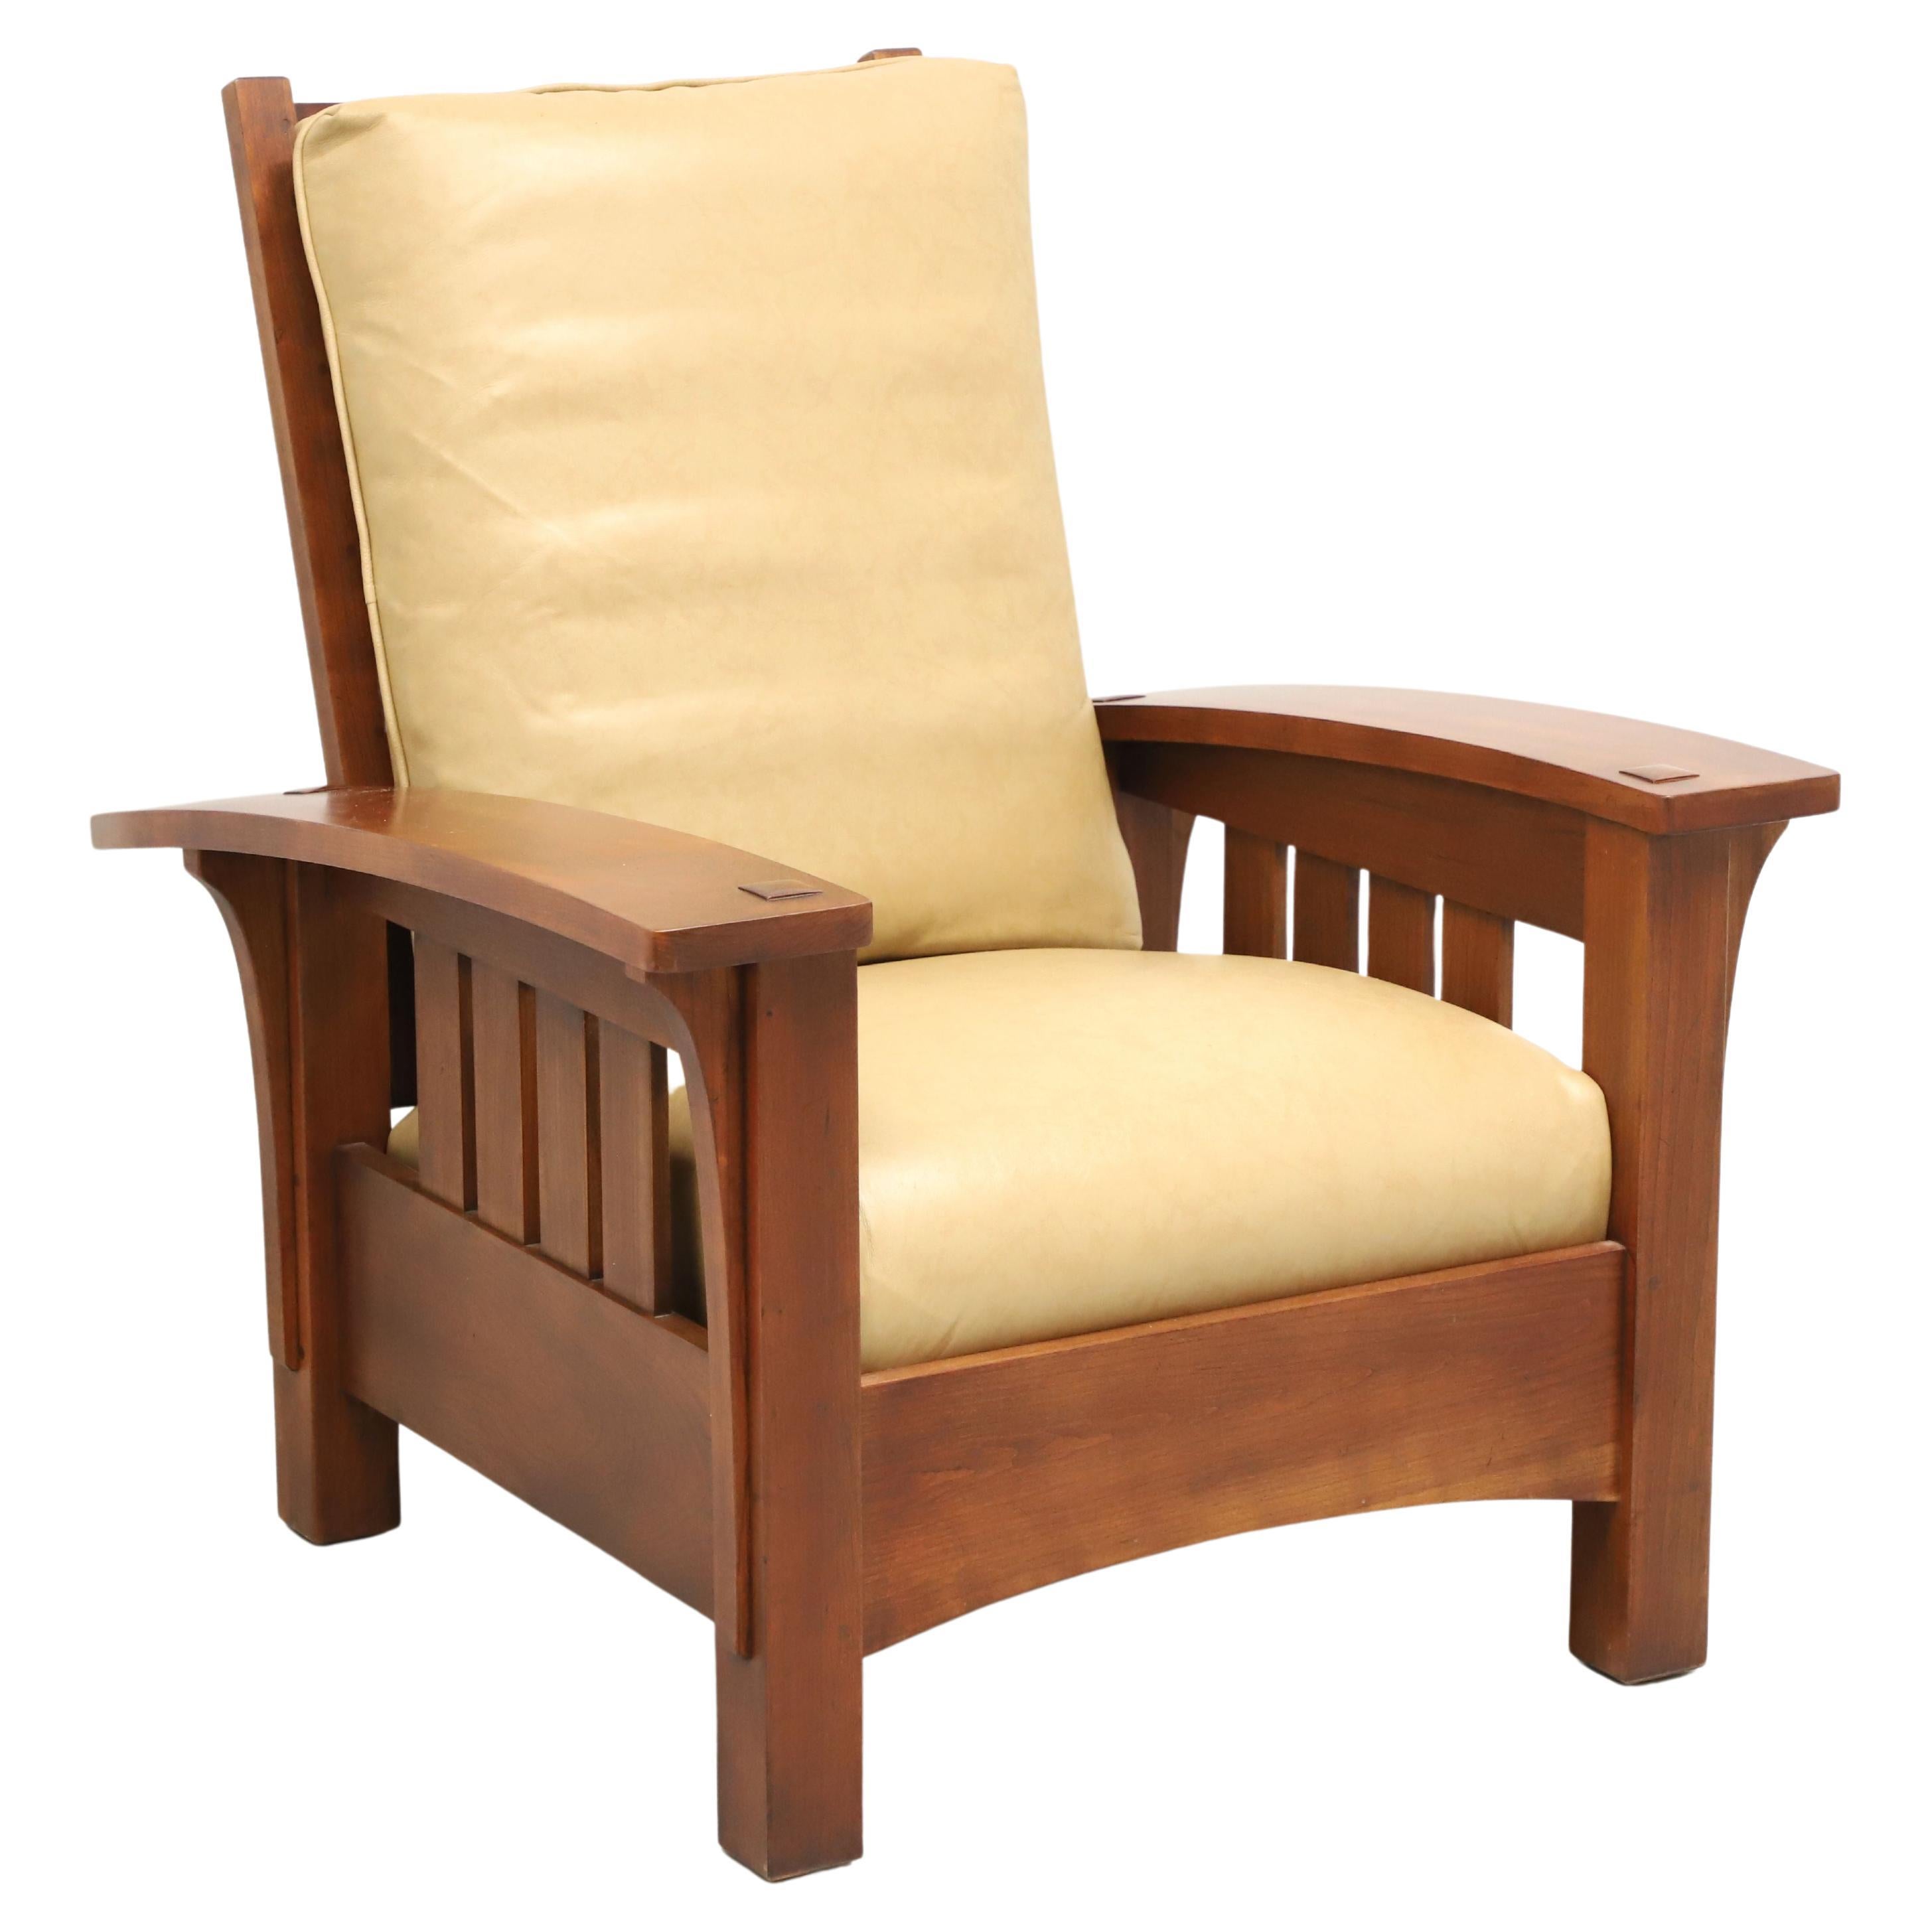 STICKLEY Cherry & Leather Bow Arm Reclining Morris Chair 91-406 - B